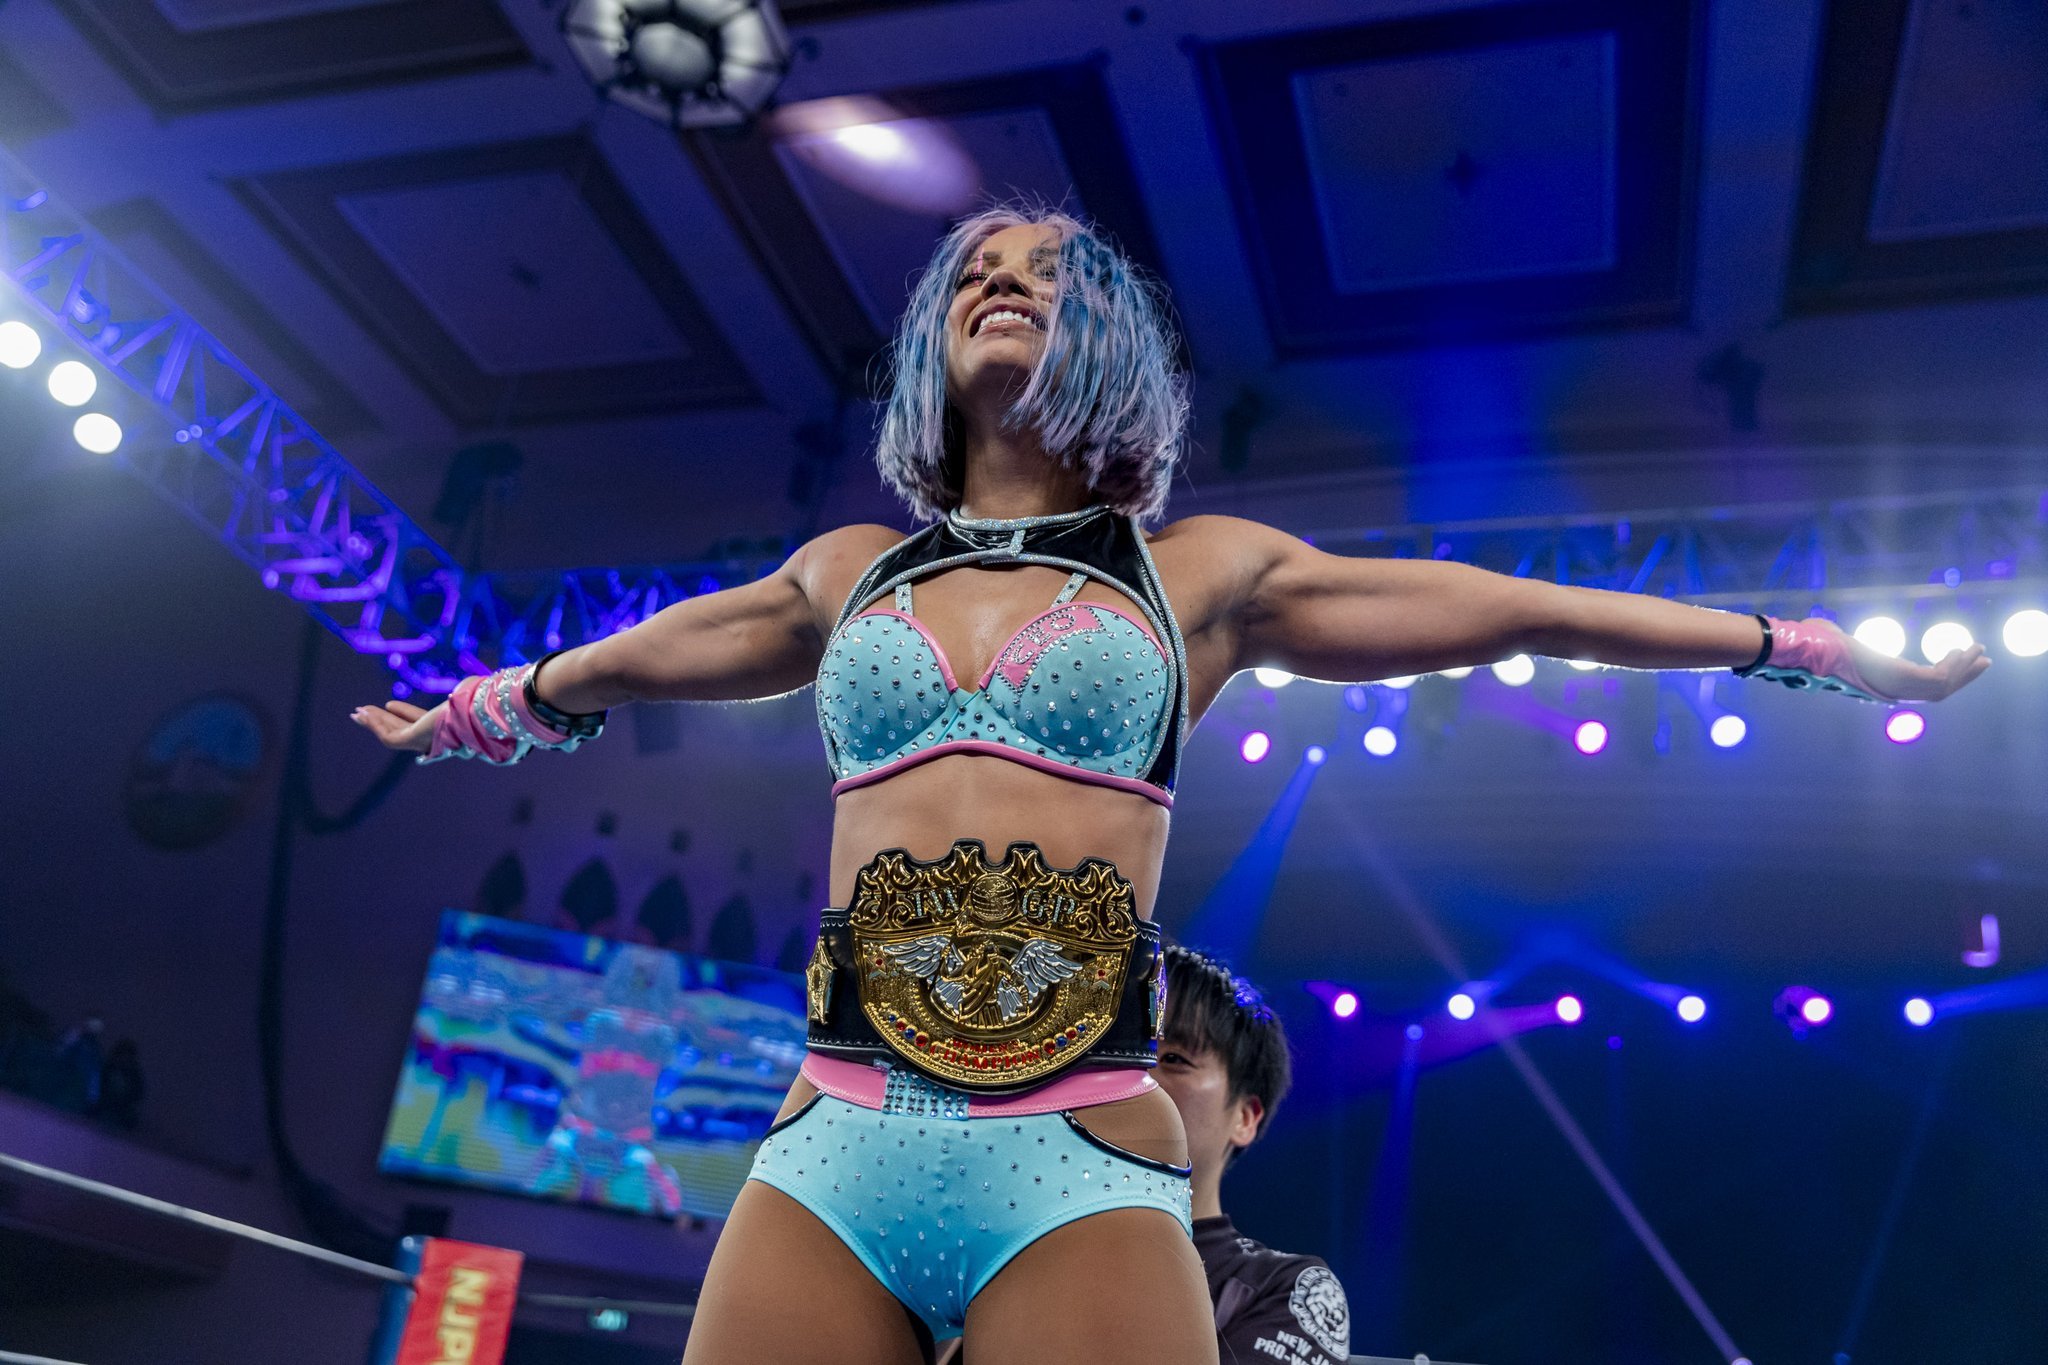 an image of Mercedes Mone after her match against Kairi, standing proudly with her arms outstretched as the IWGP Womens Championship Belt is secured around her waist by a referee.